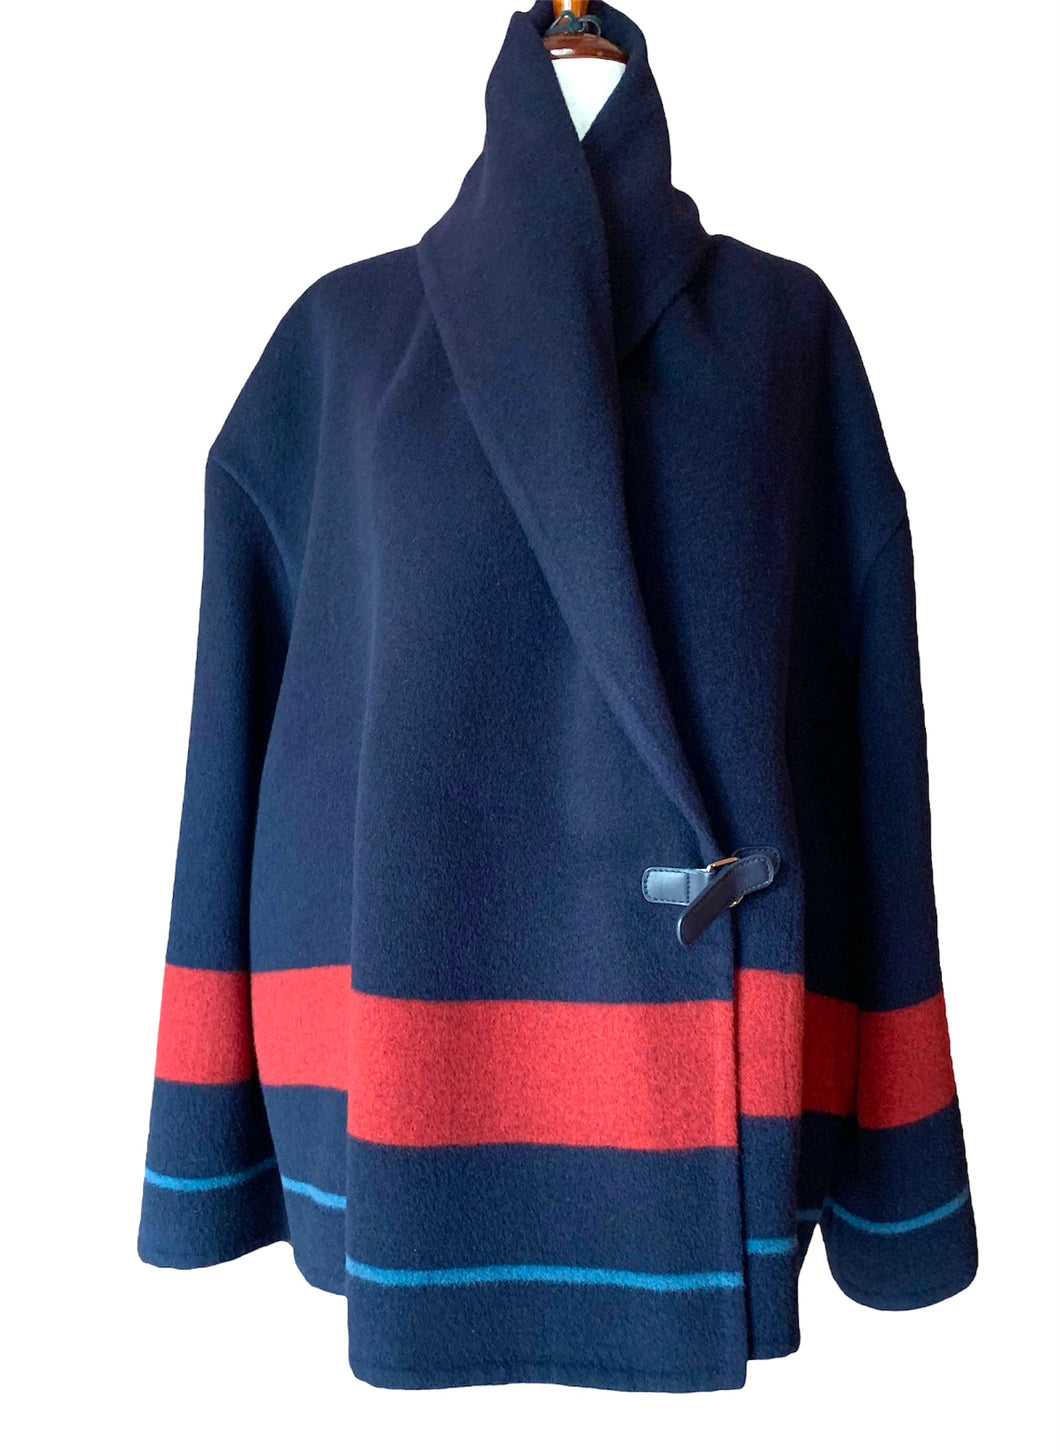 HERMÈS LUXURIOUS NEW NAVY RED BABY BLUE CASHMERE JACKET COAT $5900